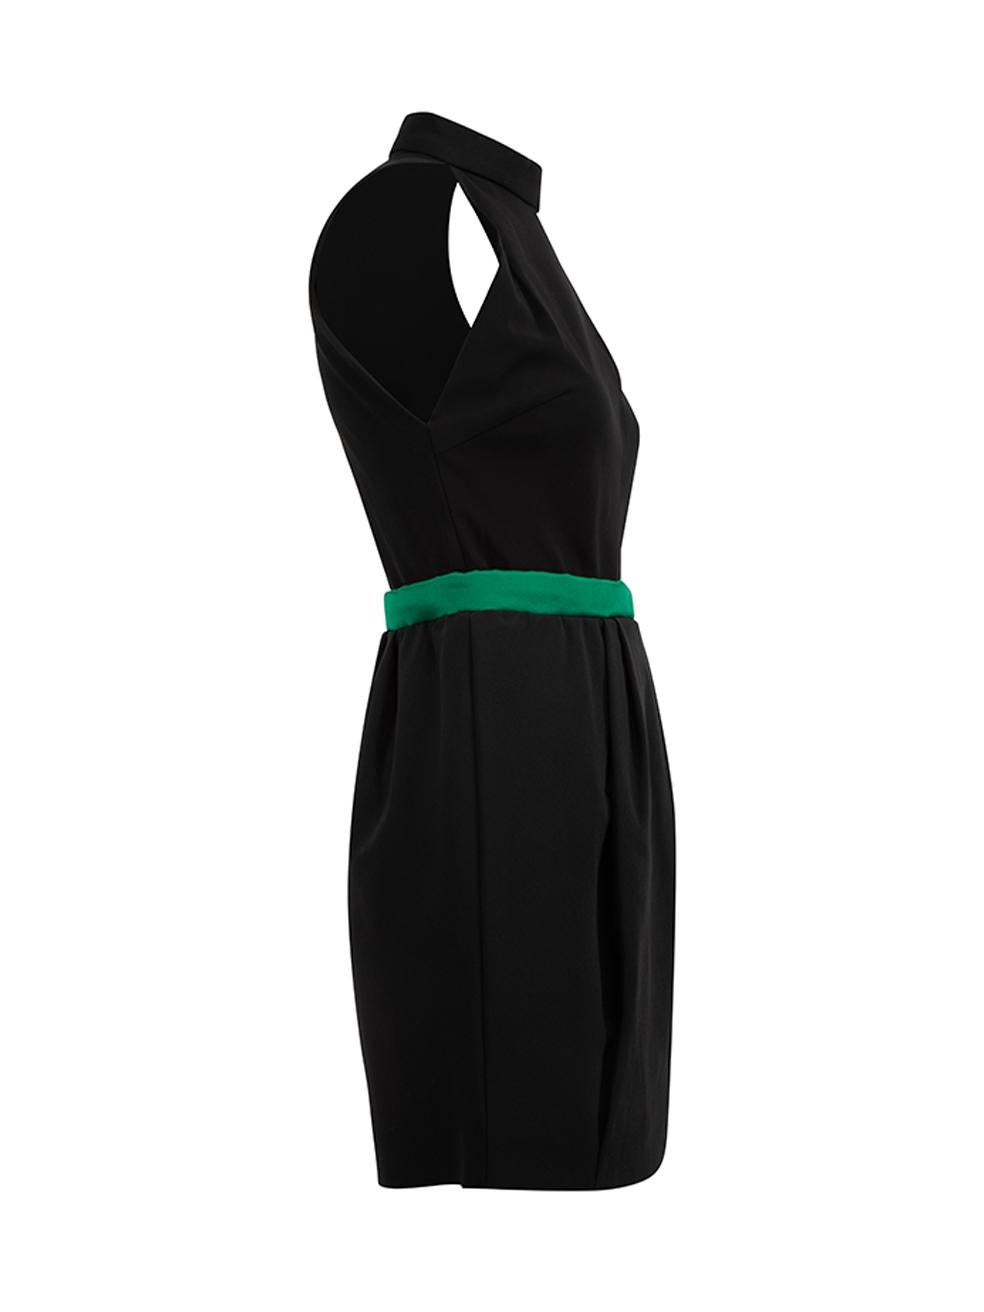 CONDITION is Very good. Hardly any visible wear to dress is evident on this used Balenciaga designer resale item. 
 
 Details
 Black
 Synthetic
 Mini dress
 Halterneck and plunge neckline
 Jewelled button closure with snap button on collar
 Green